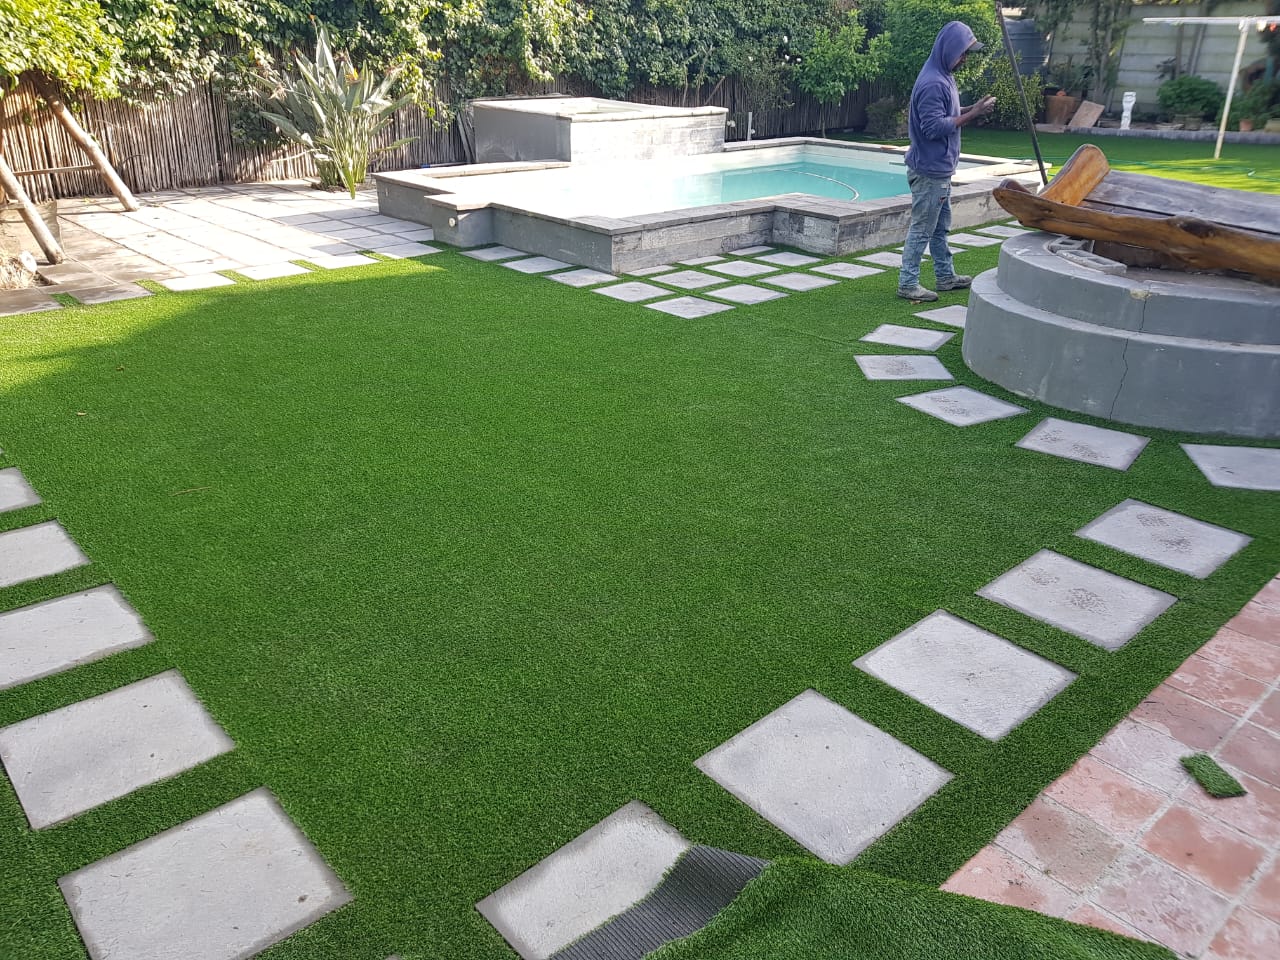 The Best Landscaping and boundary wall services in the Western Cape